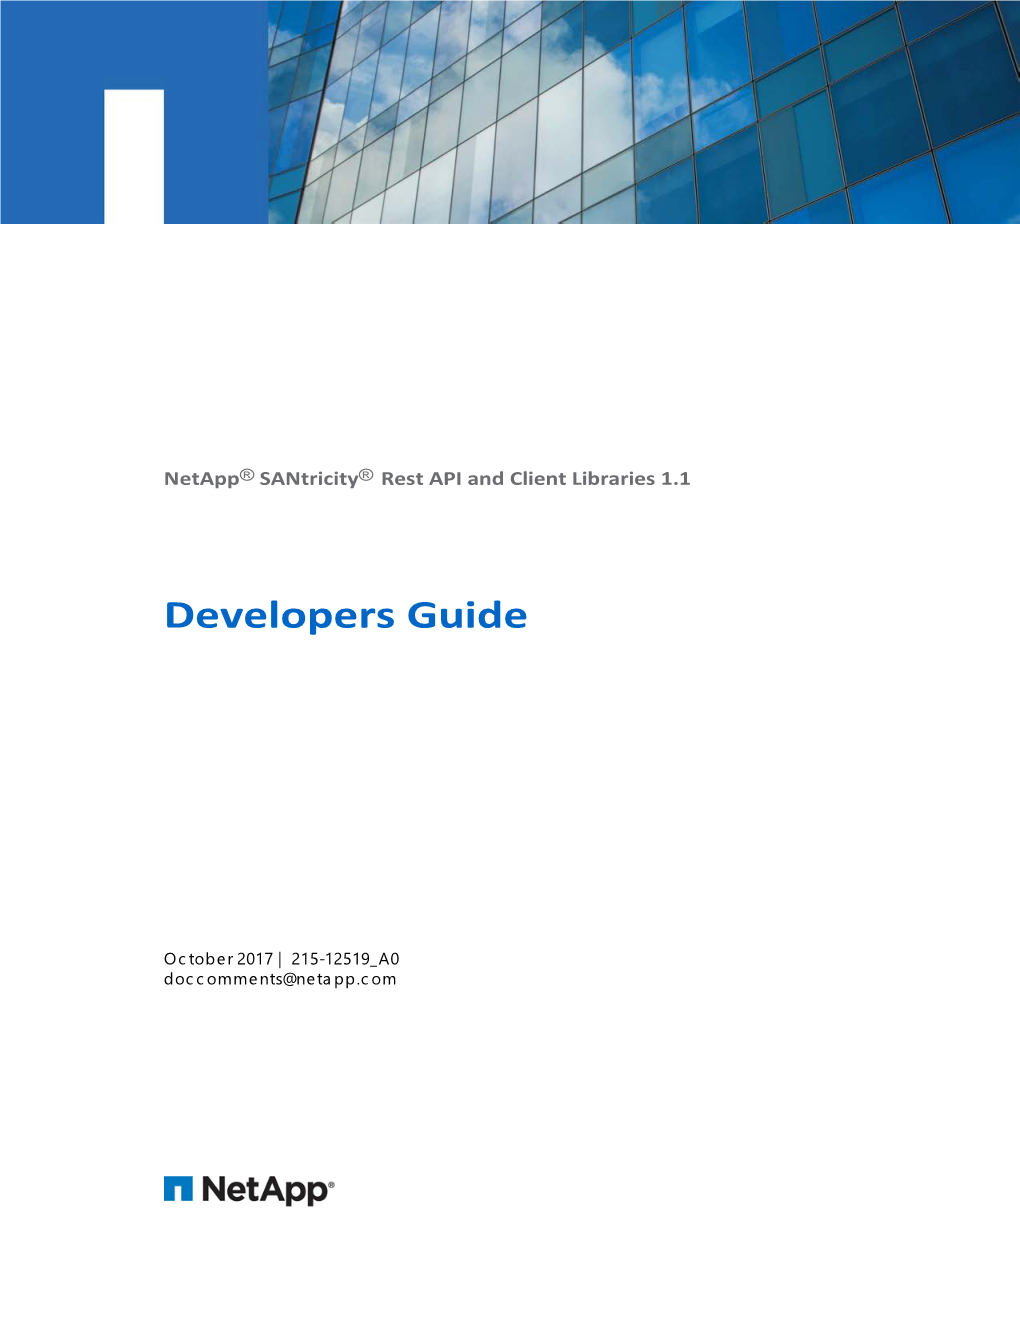 Netapp Santricity Rest API and Client Libraries Developers Guide